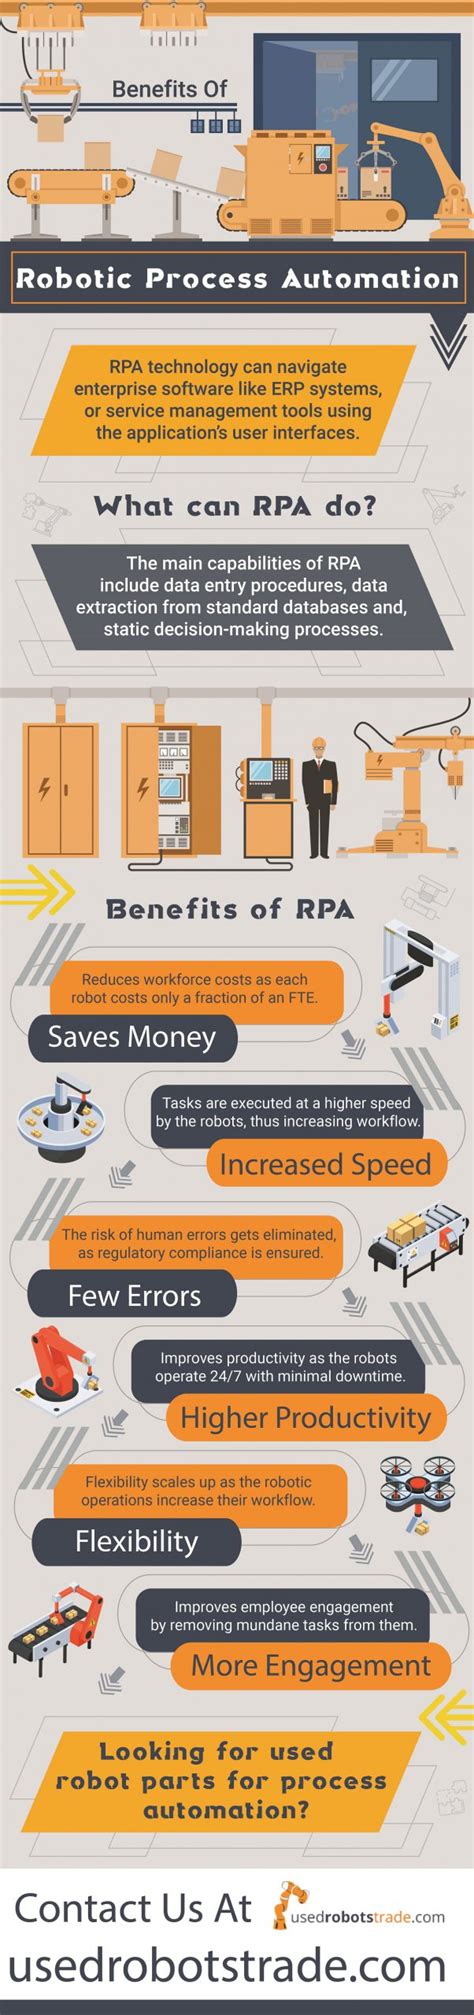 Benefits Of Robotic Process Automation Infographic